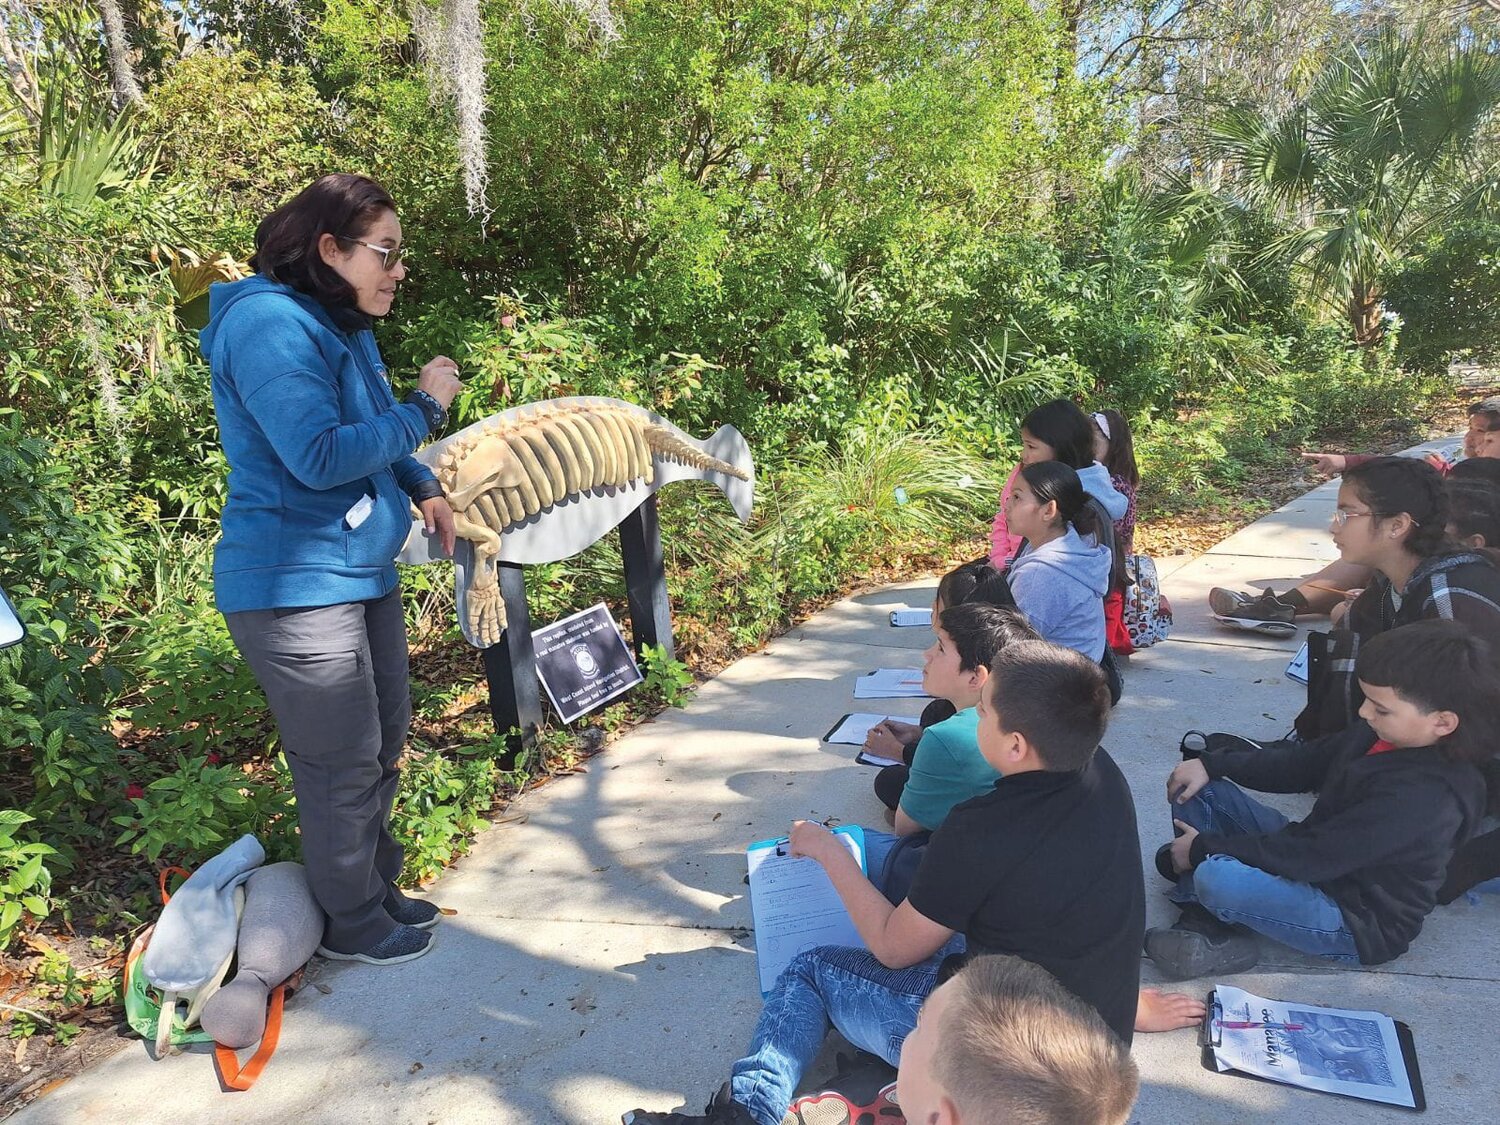 Country Oaks Elementary School Fourth Graders recently enjoyed an educational visit to Manatee Park.  Manatee Park is a non-captive warm water refuge for the Florida Manatee. Optimum viewing months are late December, January, and February when the gulf temperature is below 68F. [Photo courtesy Country Oaks Elementary]